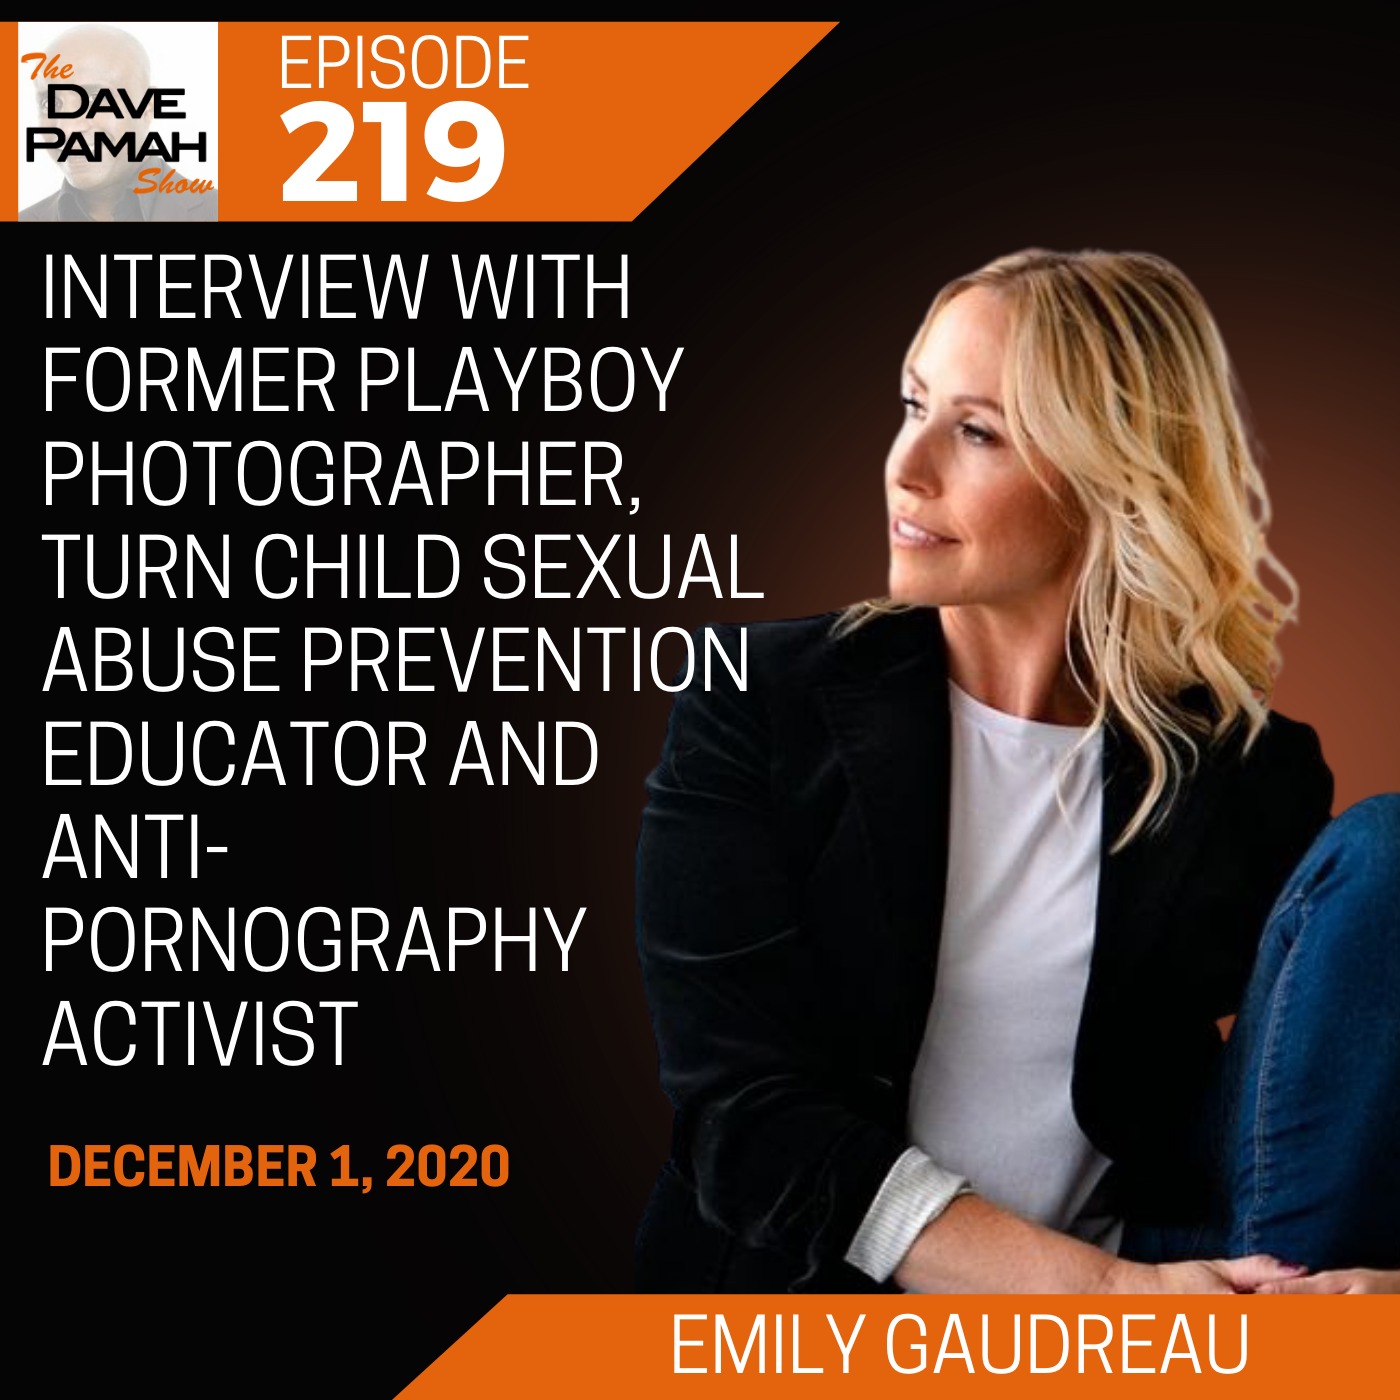 Interview with former playboy photographer, turn child sexual abuse prevention educator and anti-pornography activist Emily Gaudreau Image